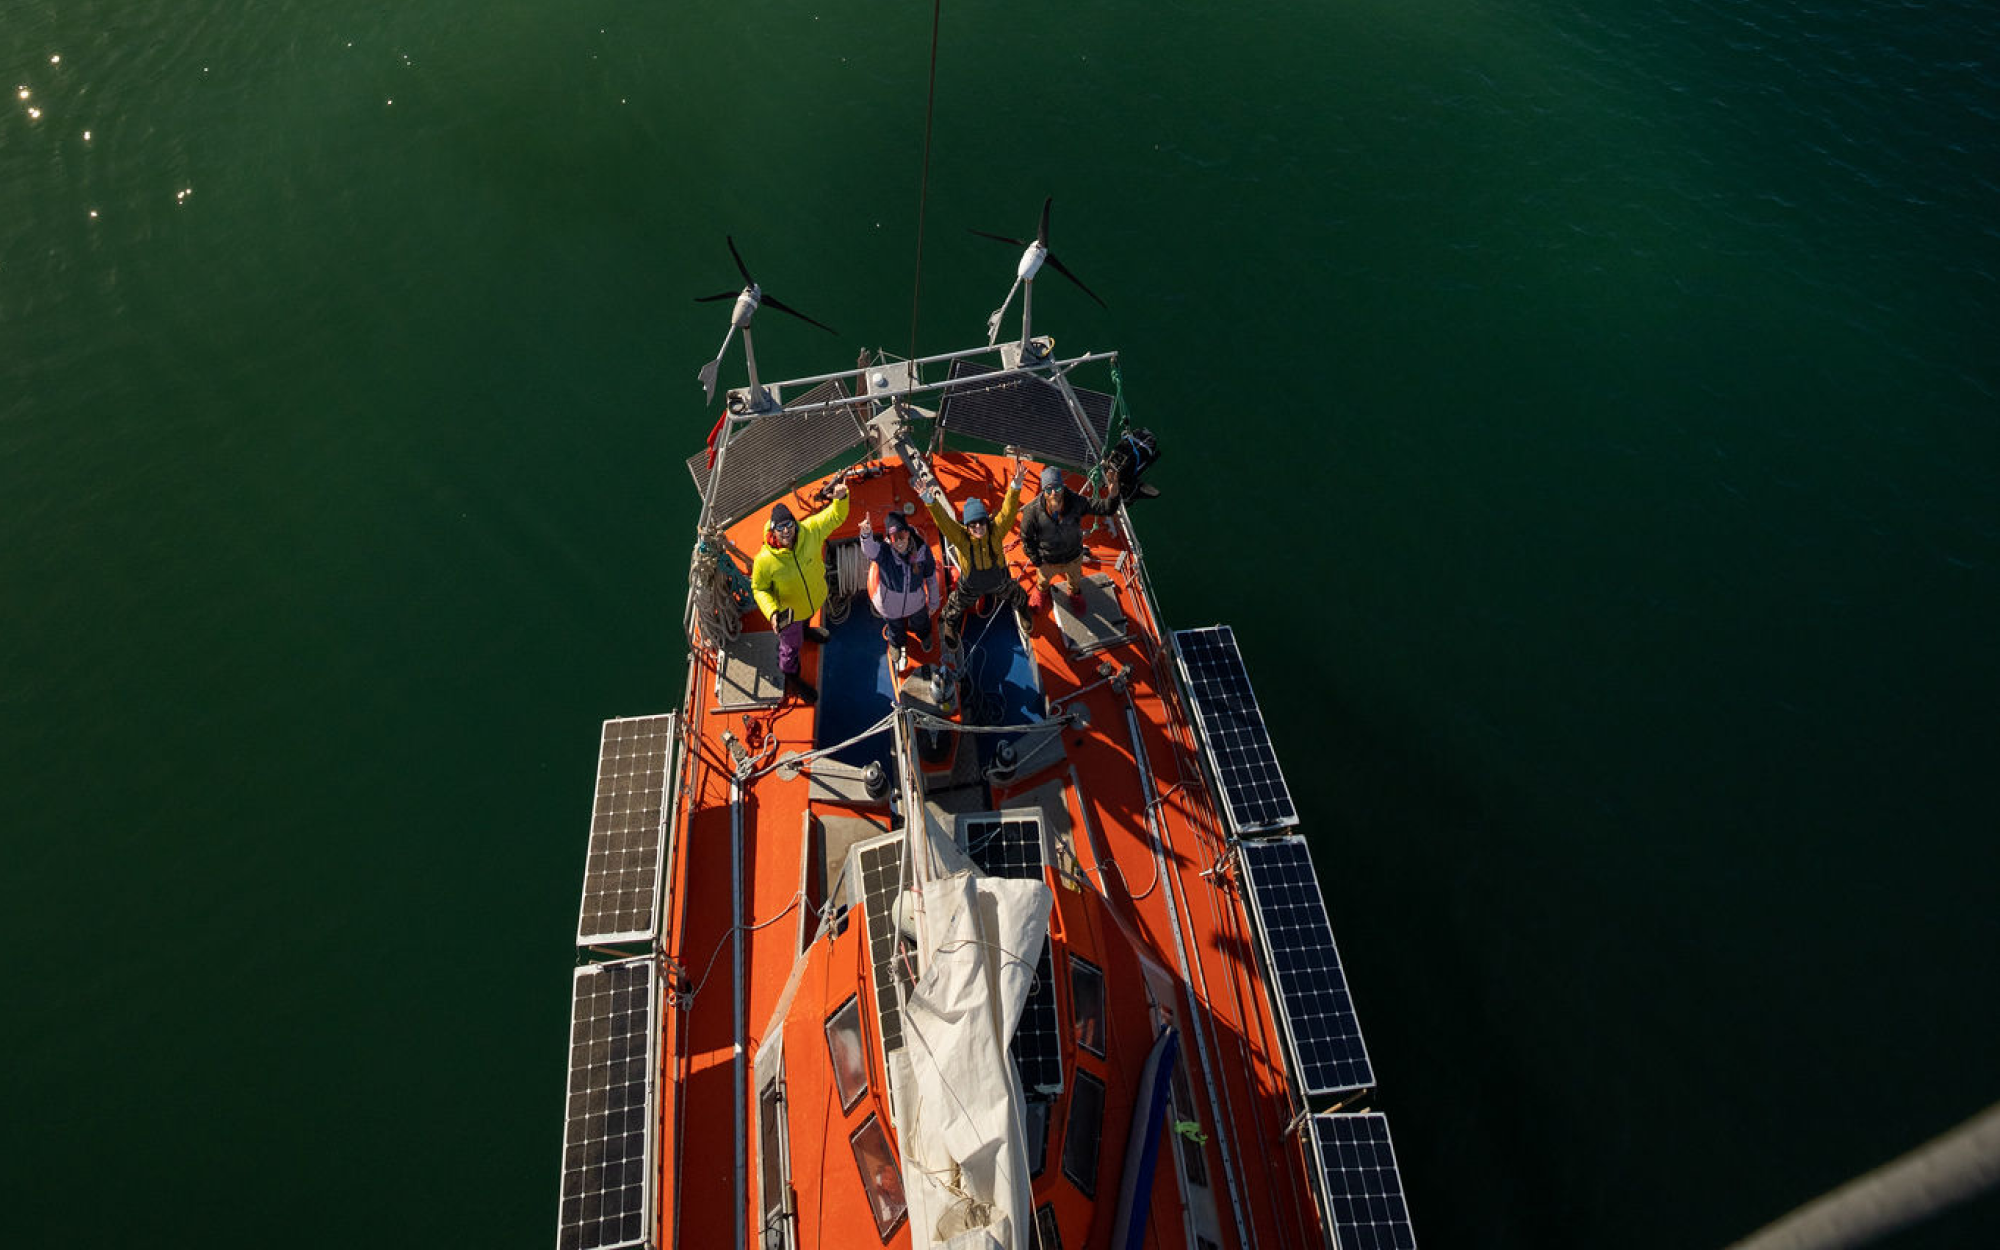 Arial shot of the crew on the solar powered sailboat.